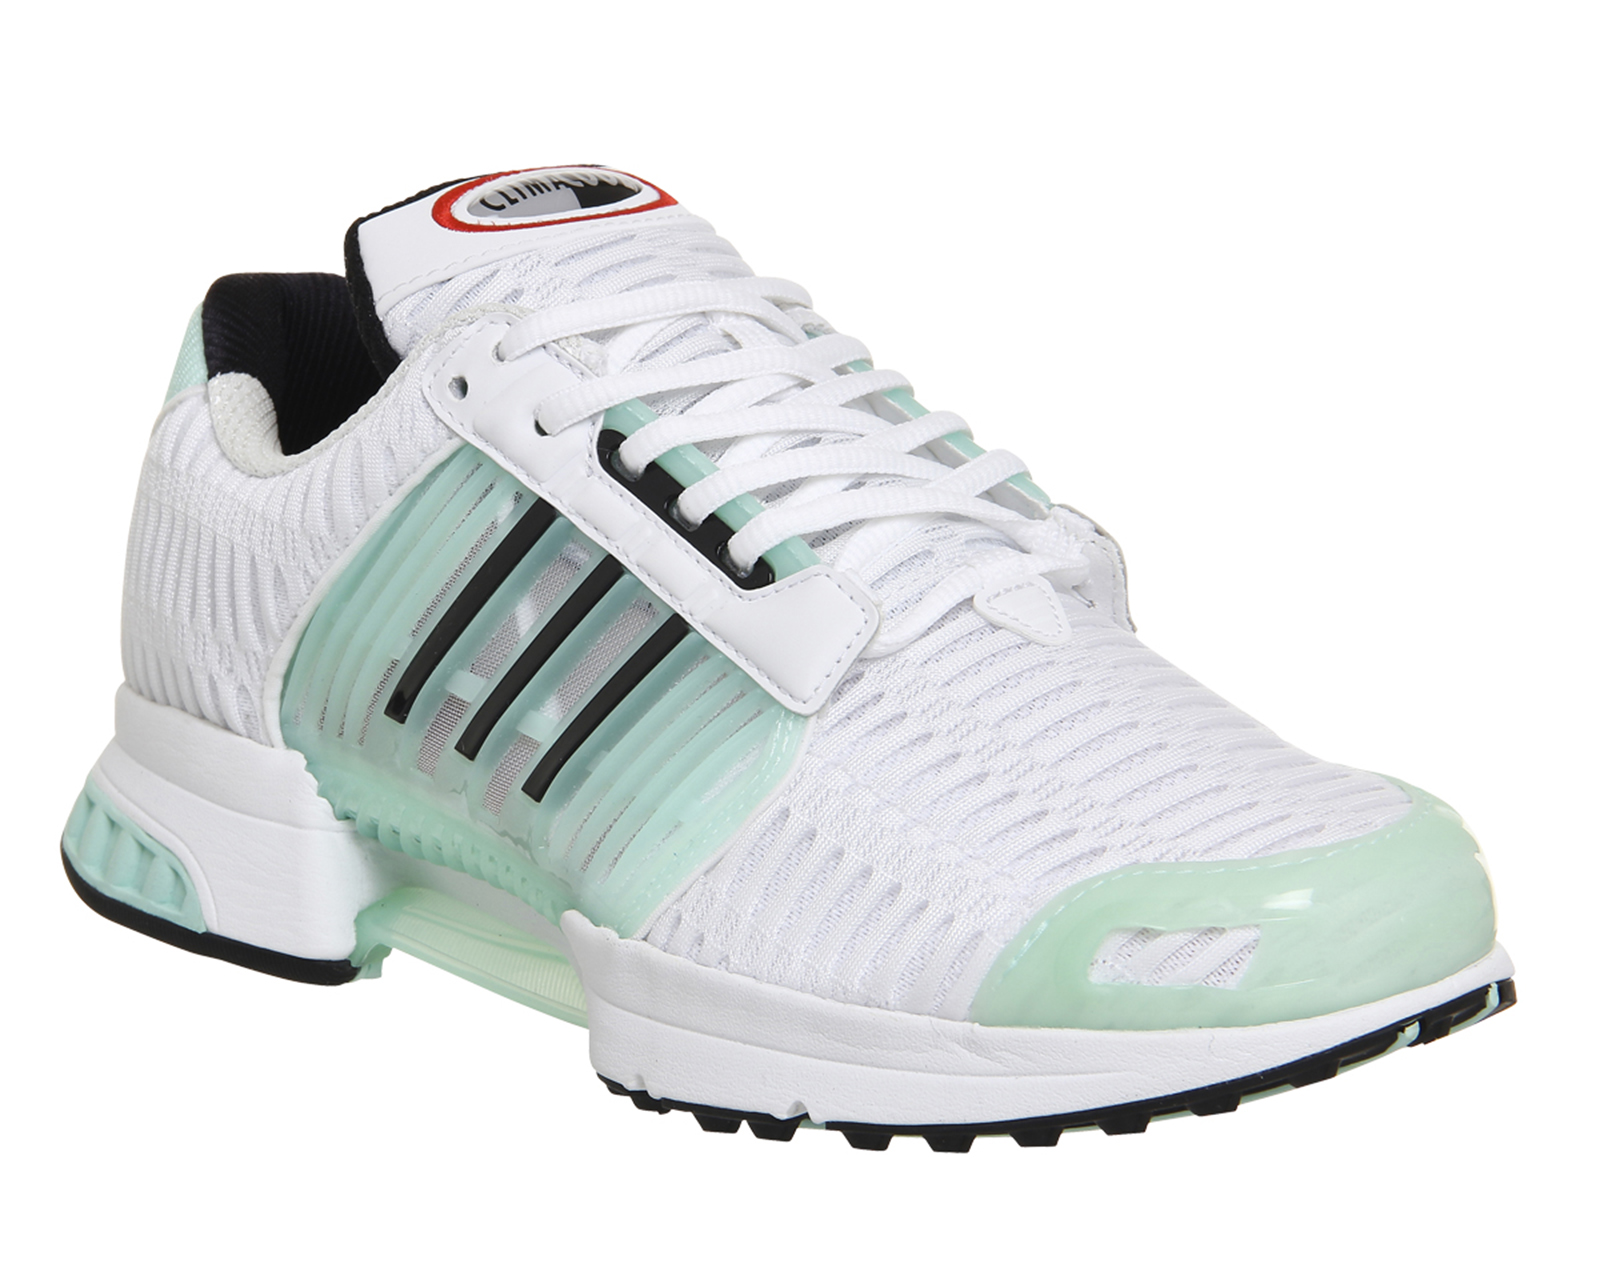 Adidas Climacool Trainers White Hot Sale, UP TO 70% OFF